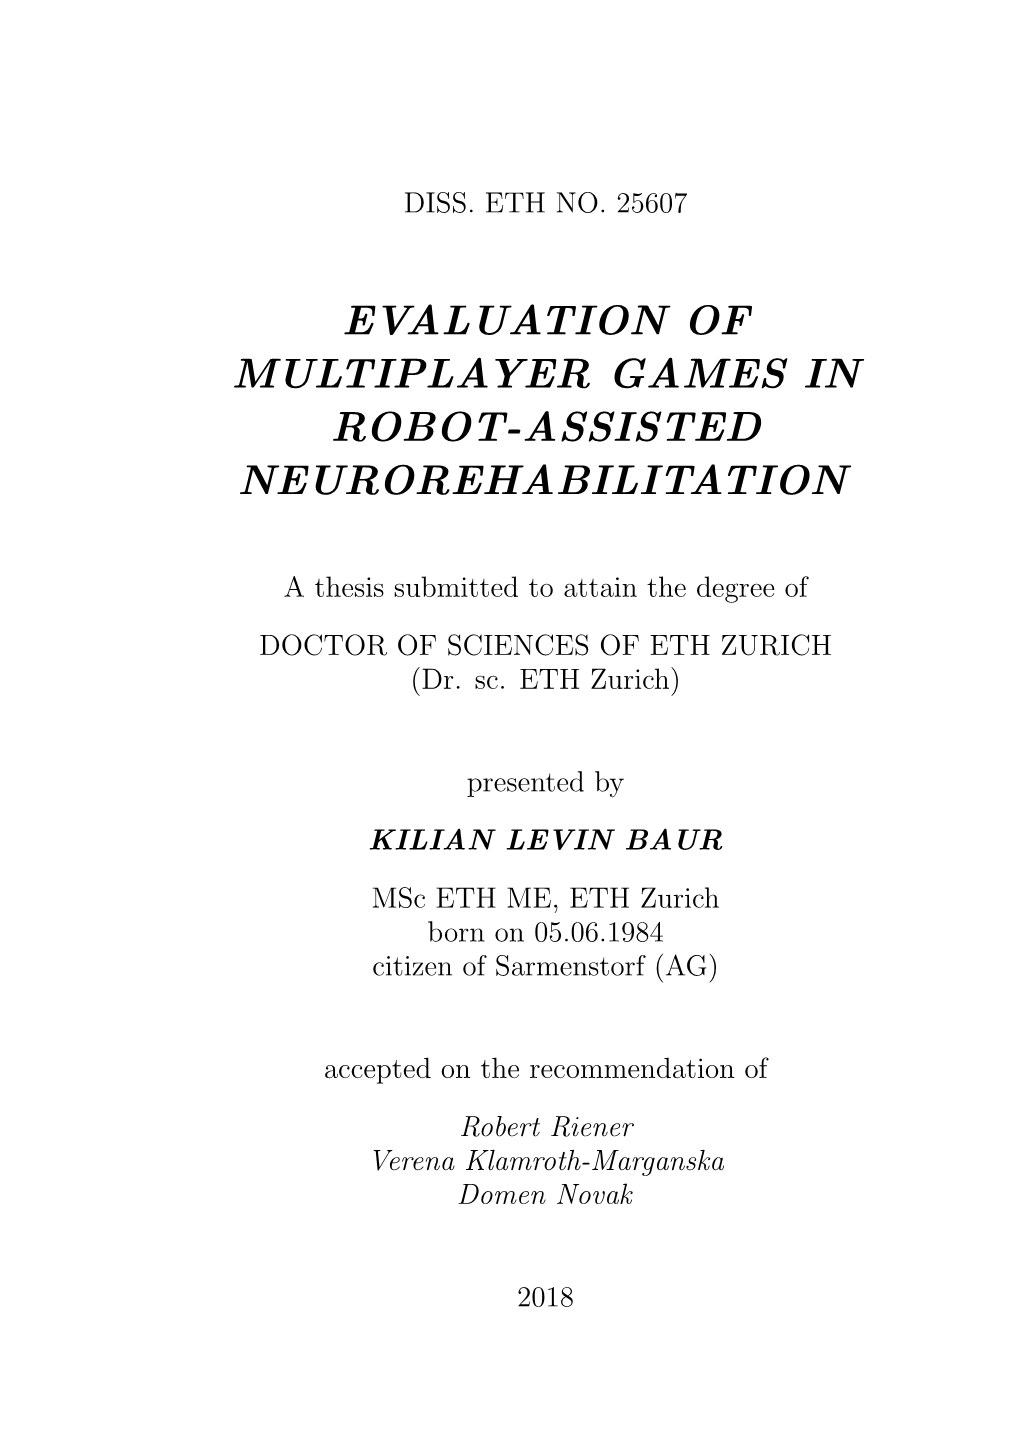 Evaluation of Multiplayer Games in Robot-Assisted Neurorehabilitation